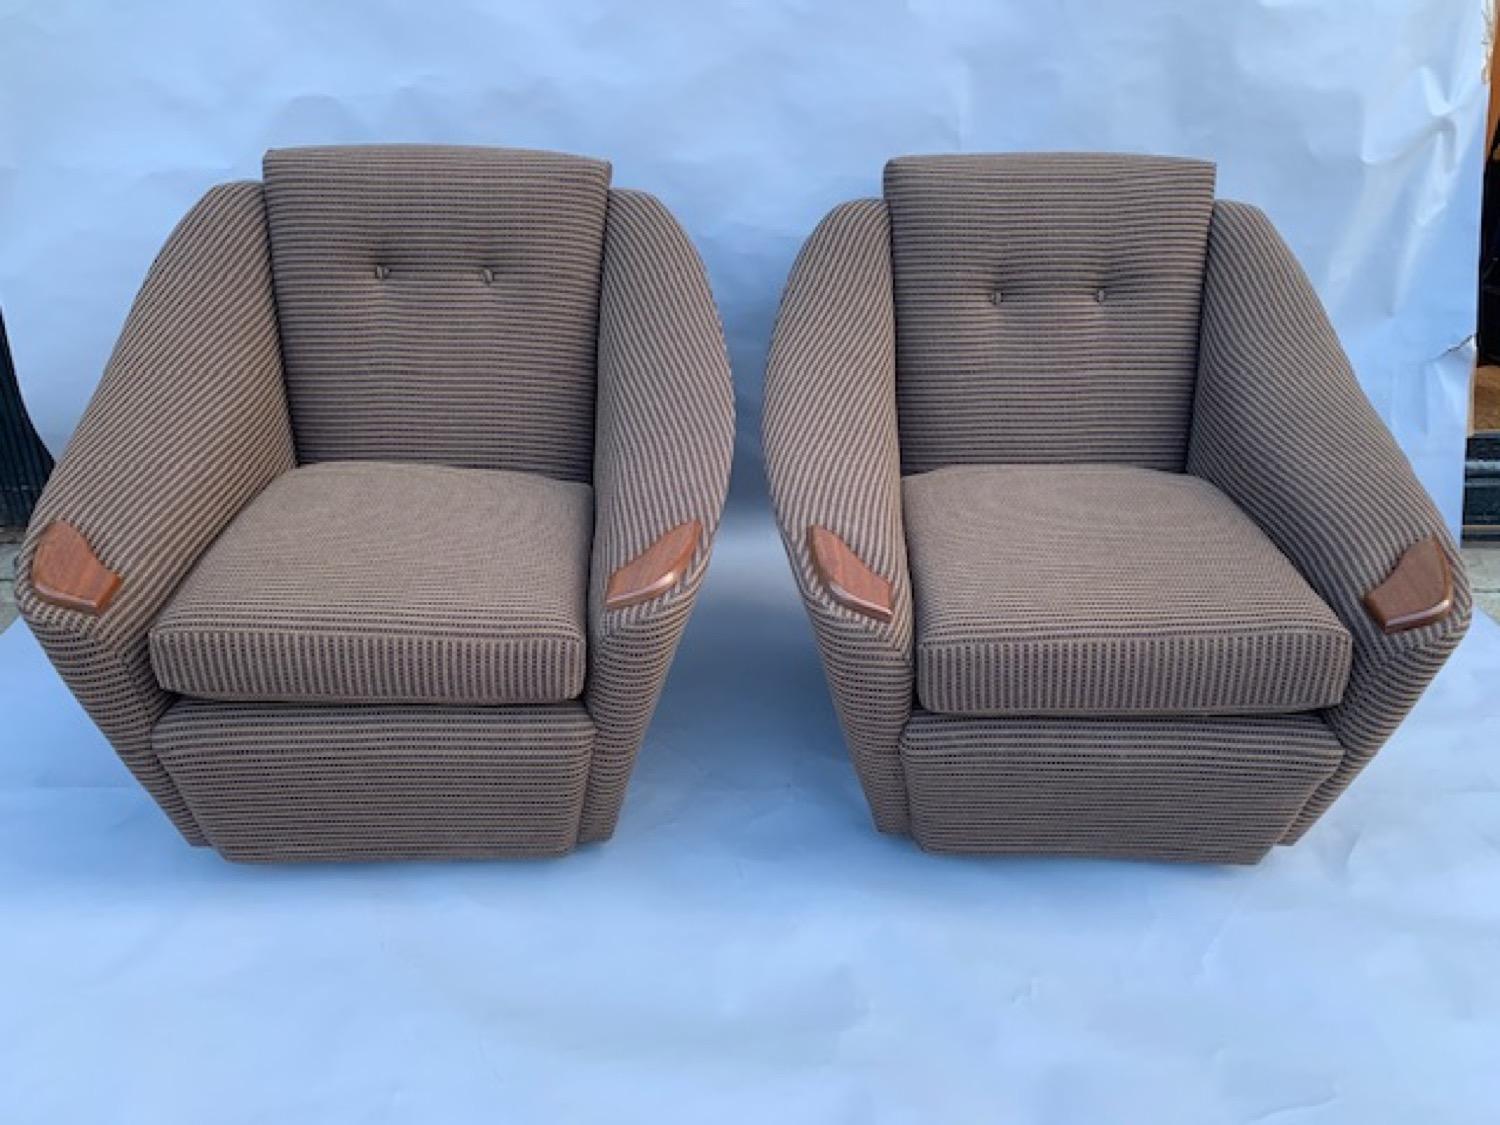 English Pair of 1960s Armchairs in Brown Bute Fabric with Polished Teak Handrests For Sale